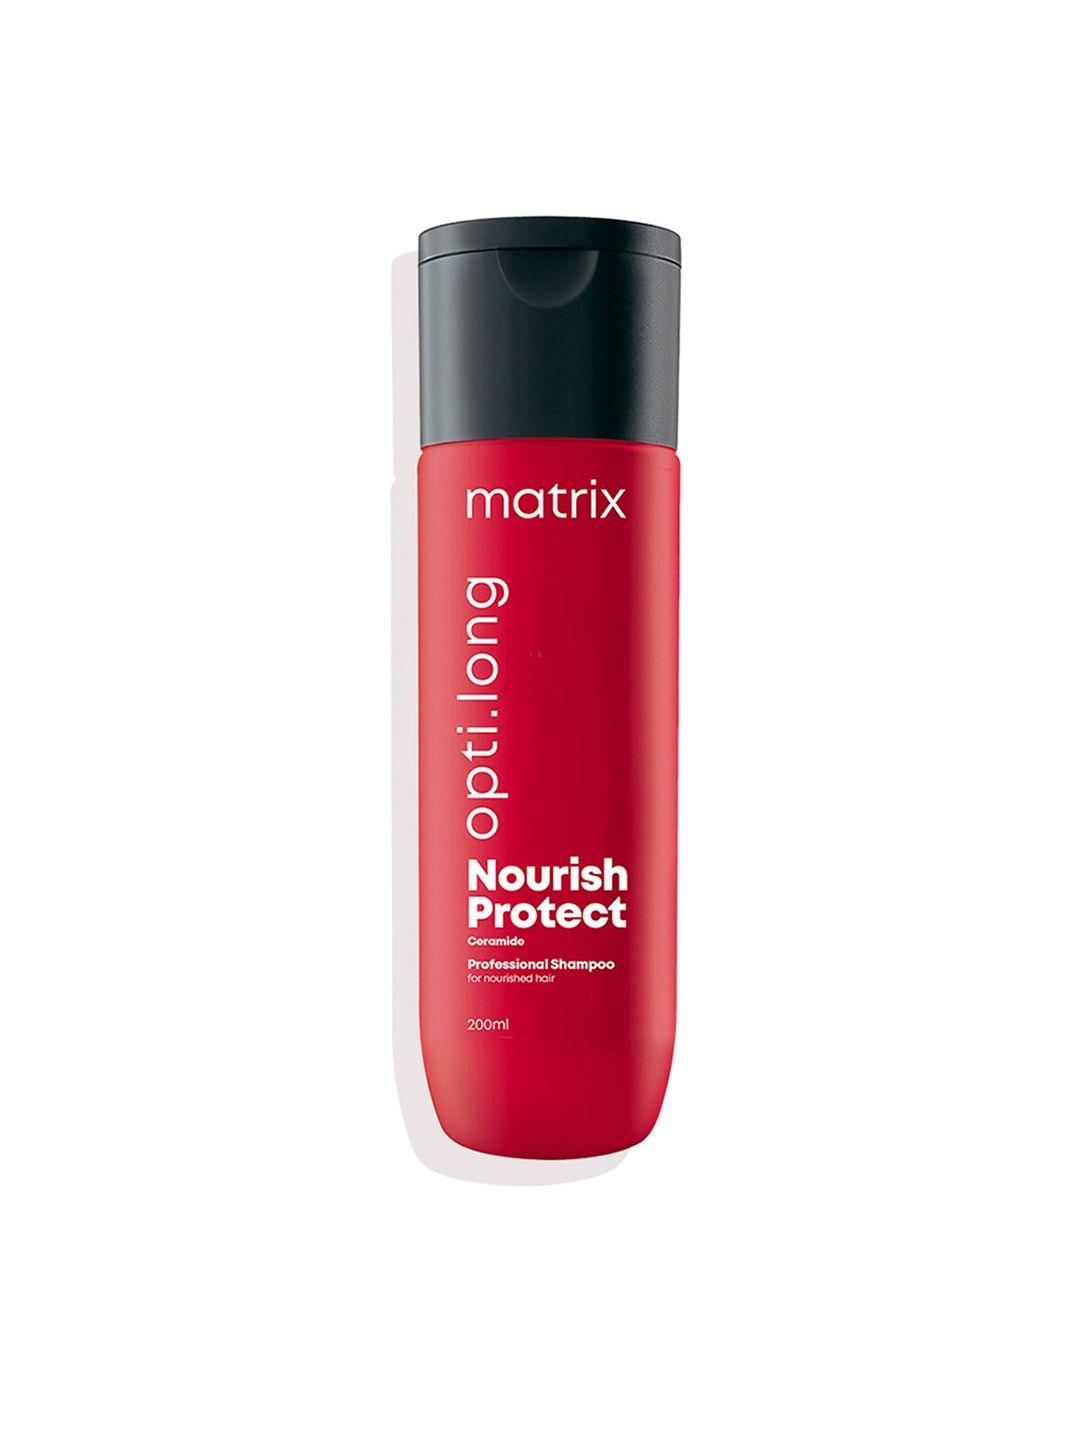 matrix opti long nourish protect shampoo with ceramide to protects from split ends - 200ml